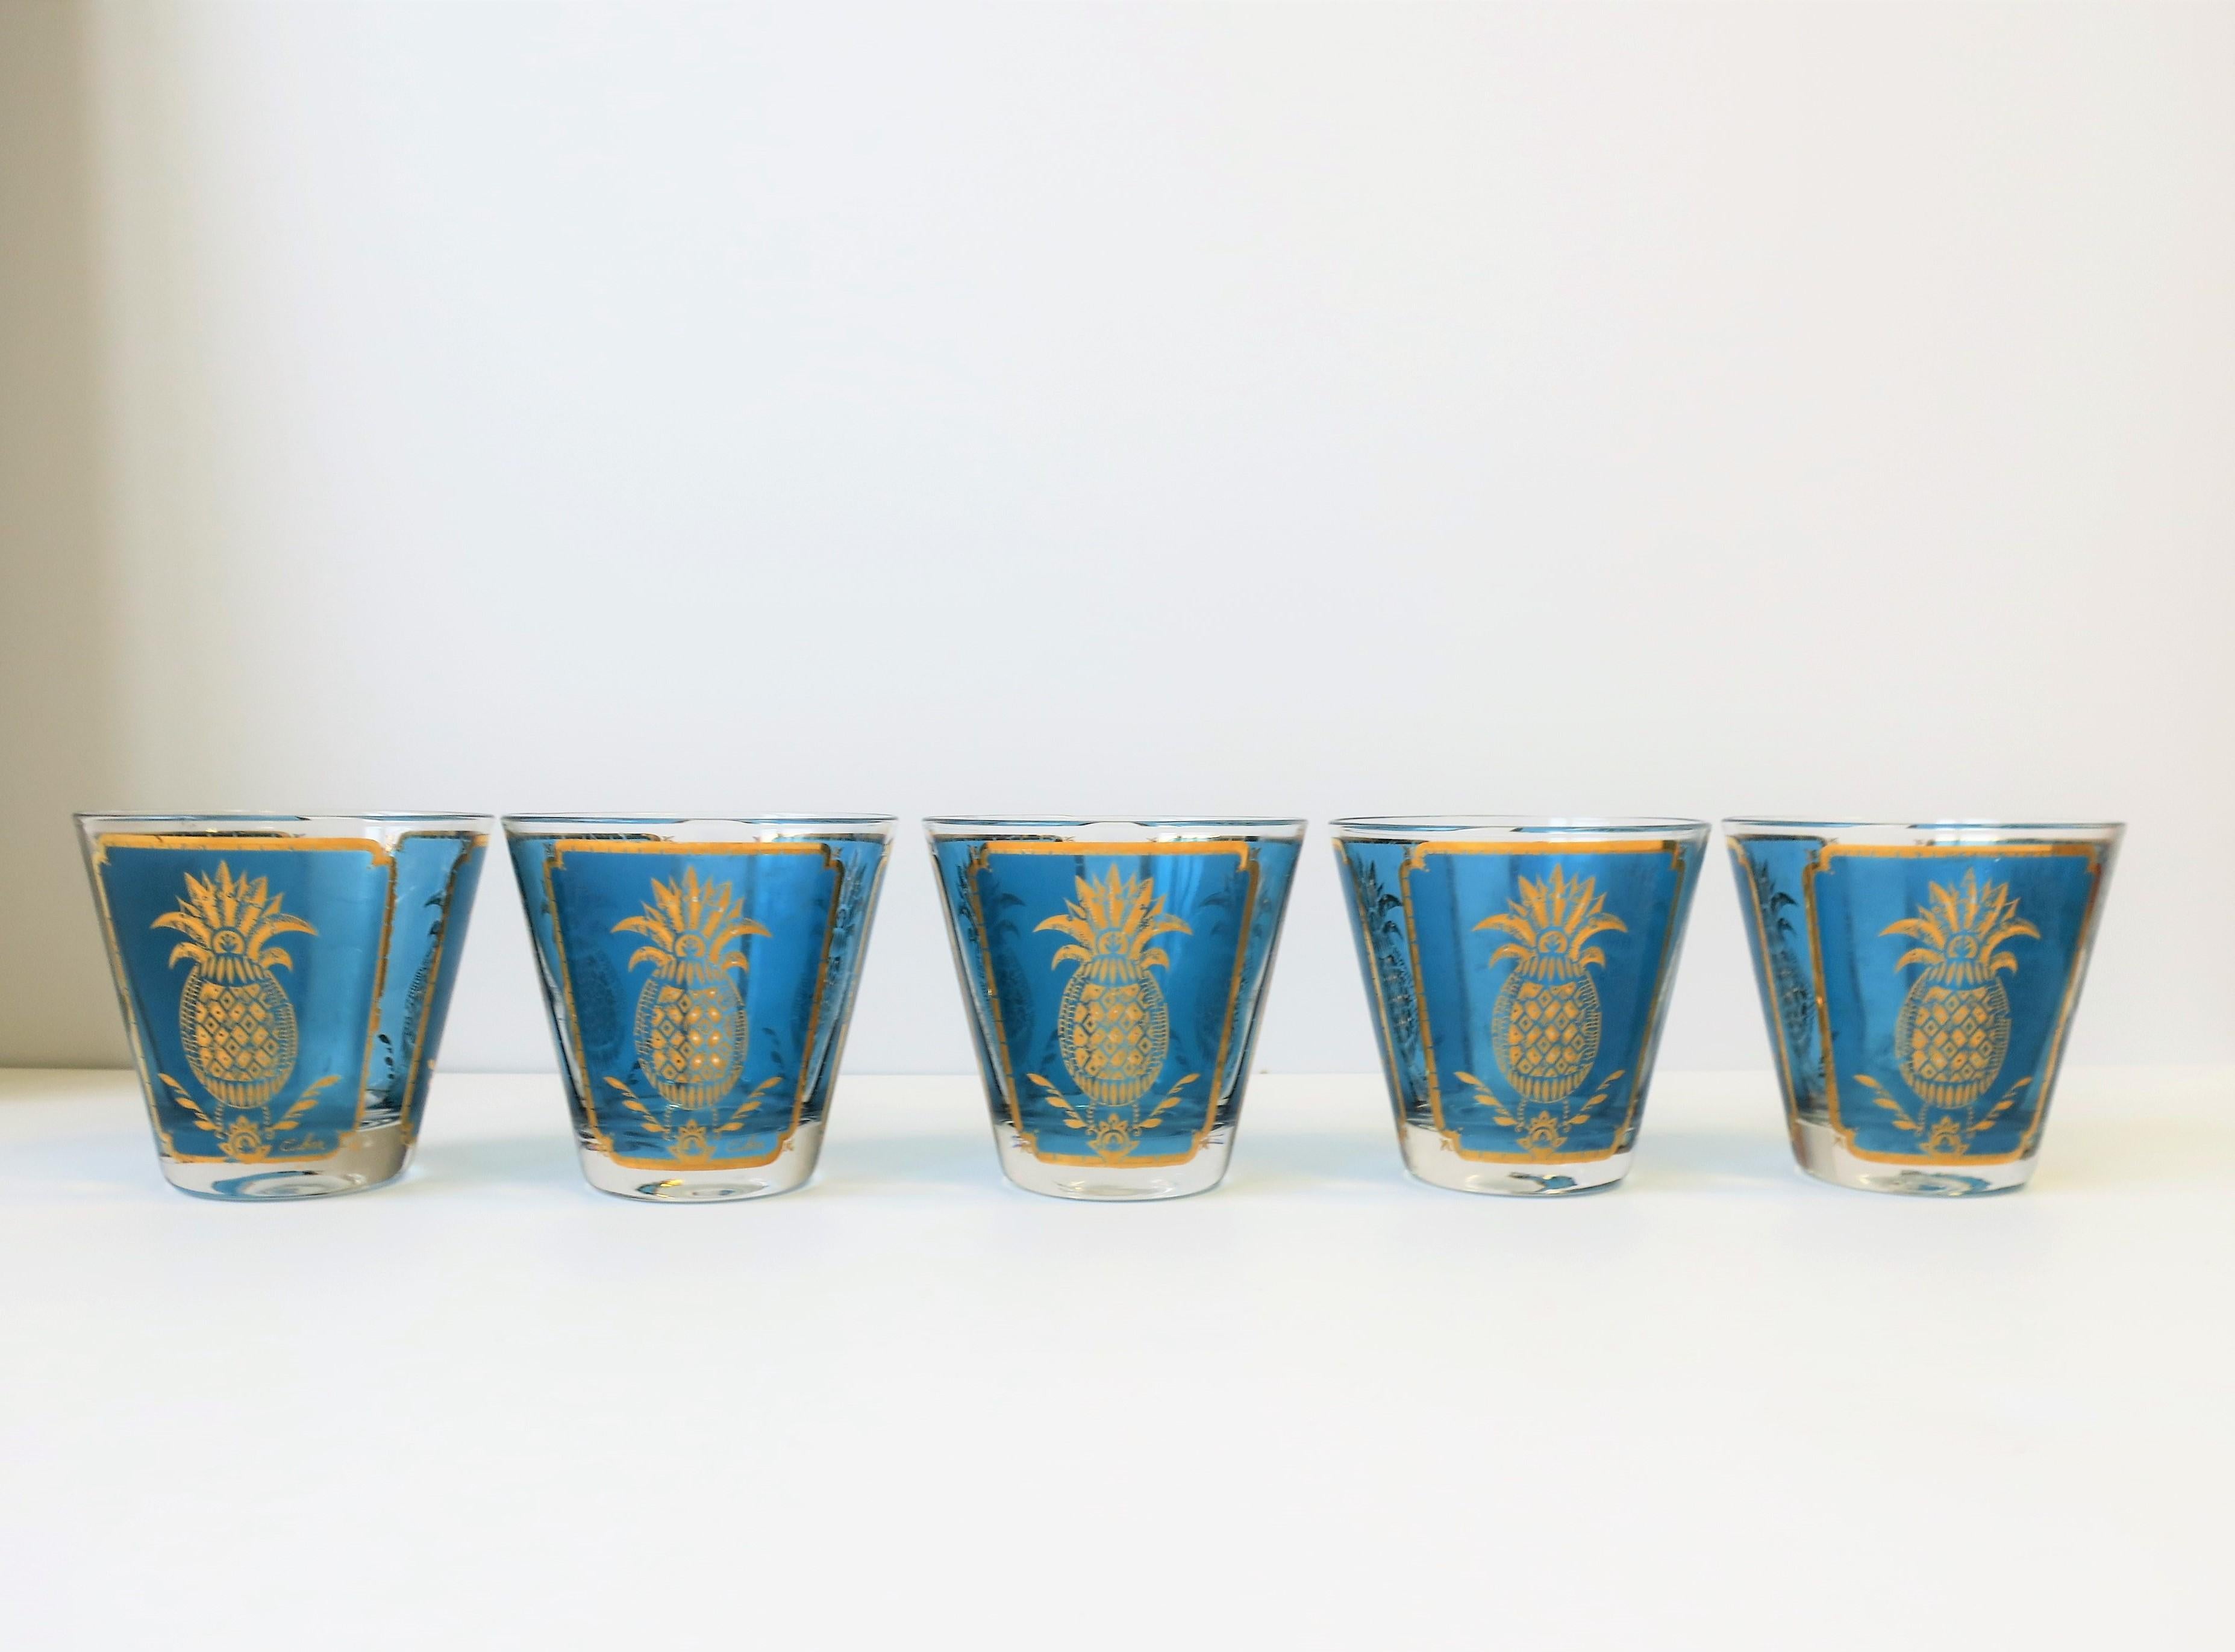 A beautiful set of 5 mid-20th century blue and 22-karat gold cocktail rocks' glasses with pineapple design by Culver in the Hollywood Regency style. Great for summer or holiday entertaining on a bar cart, bar area, tray, etc. With maker's mark on